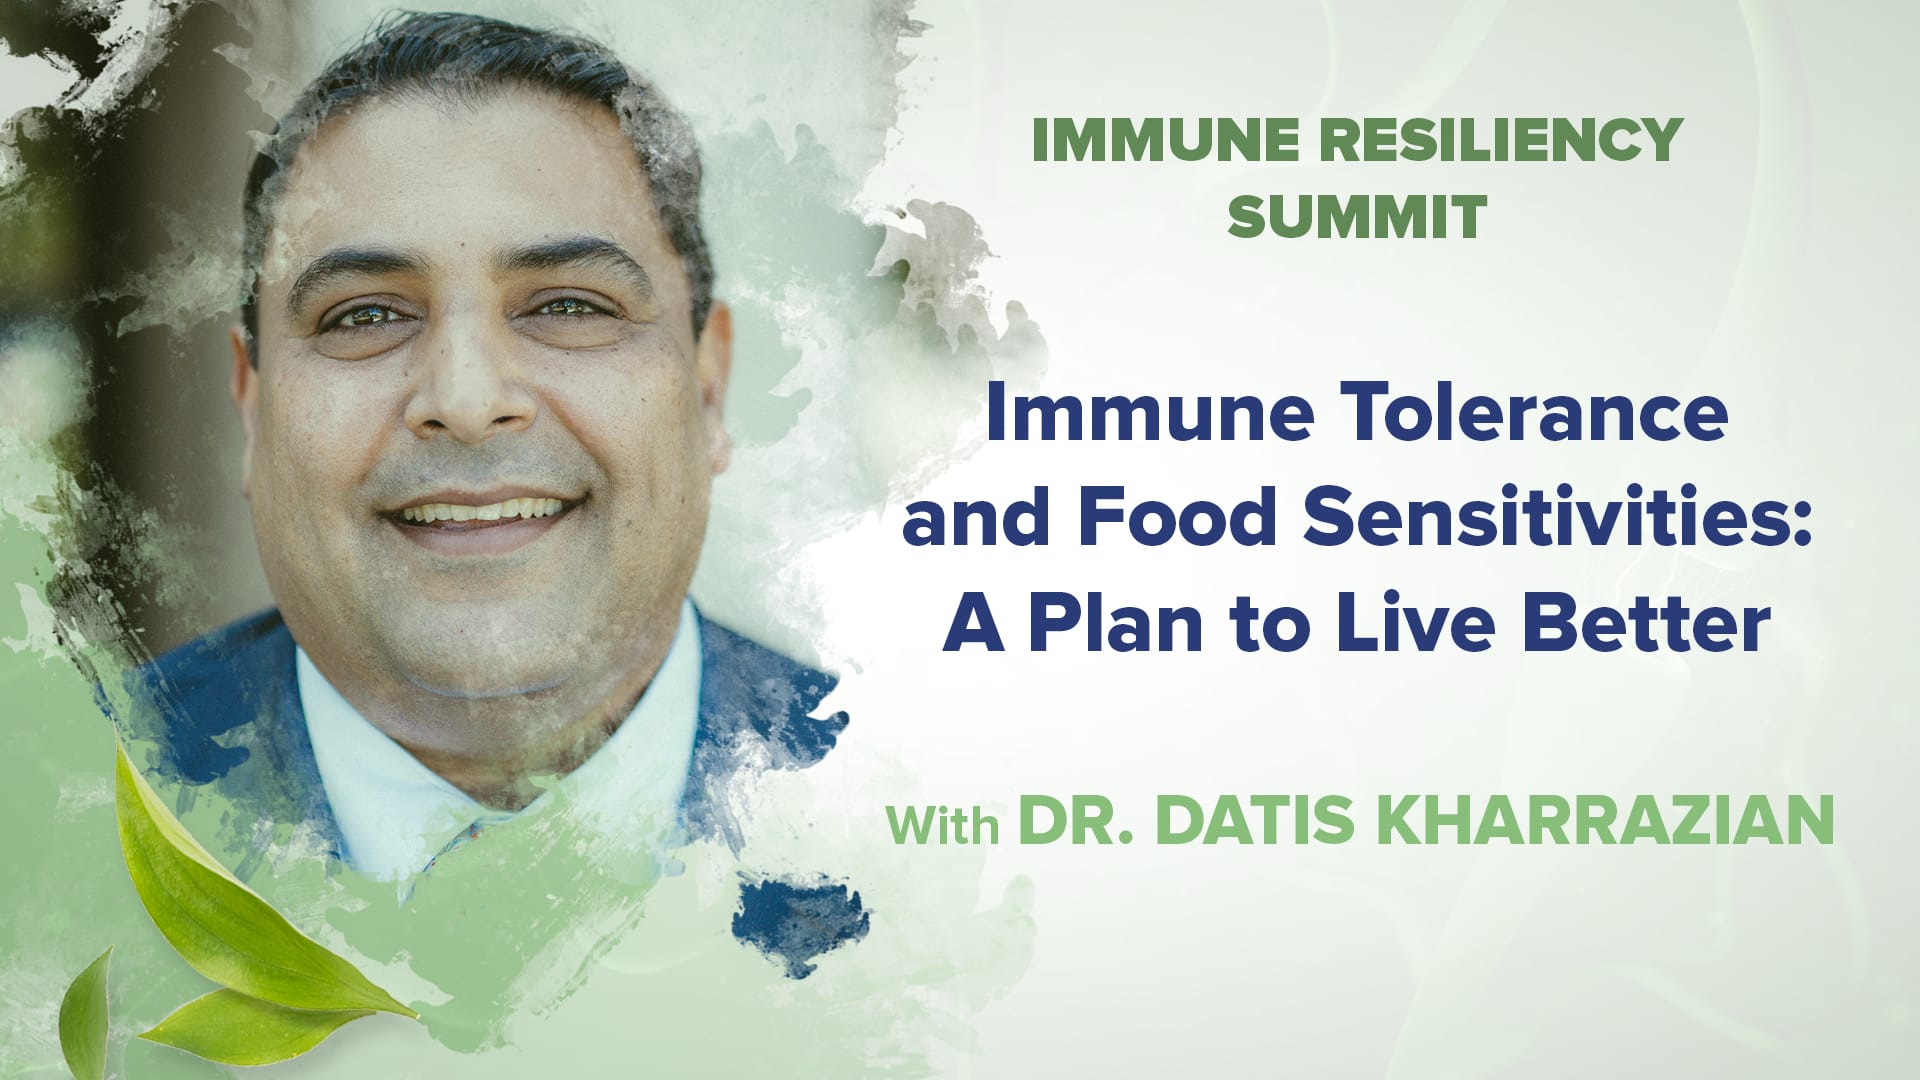 Immune Tolerance and Food Sensitivities: A Plan to Live Better